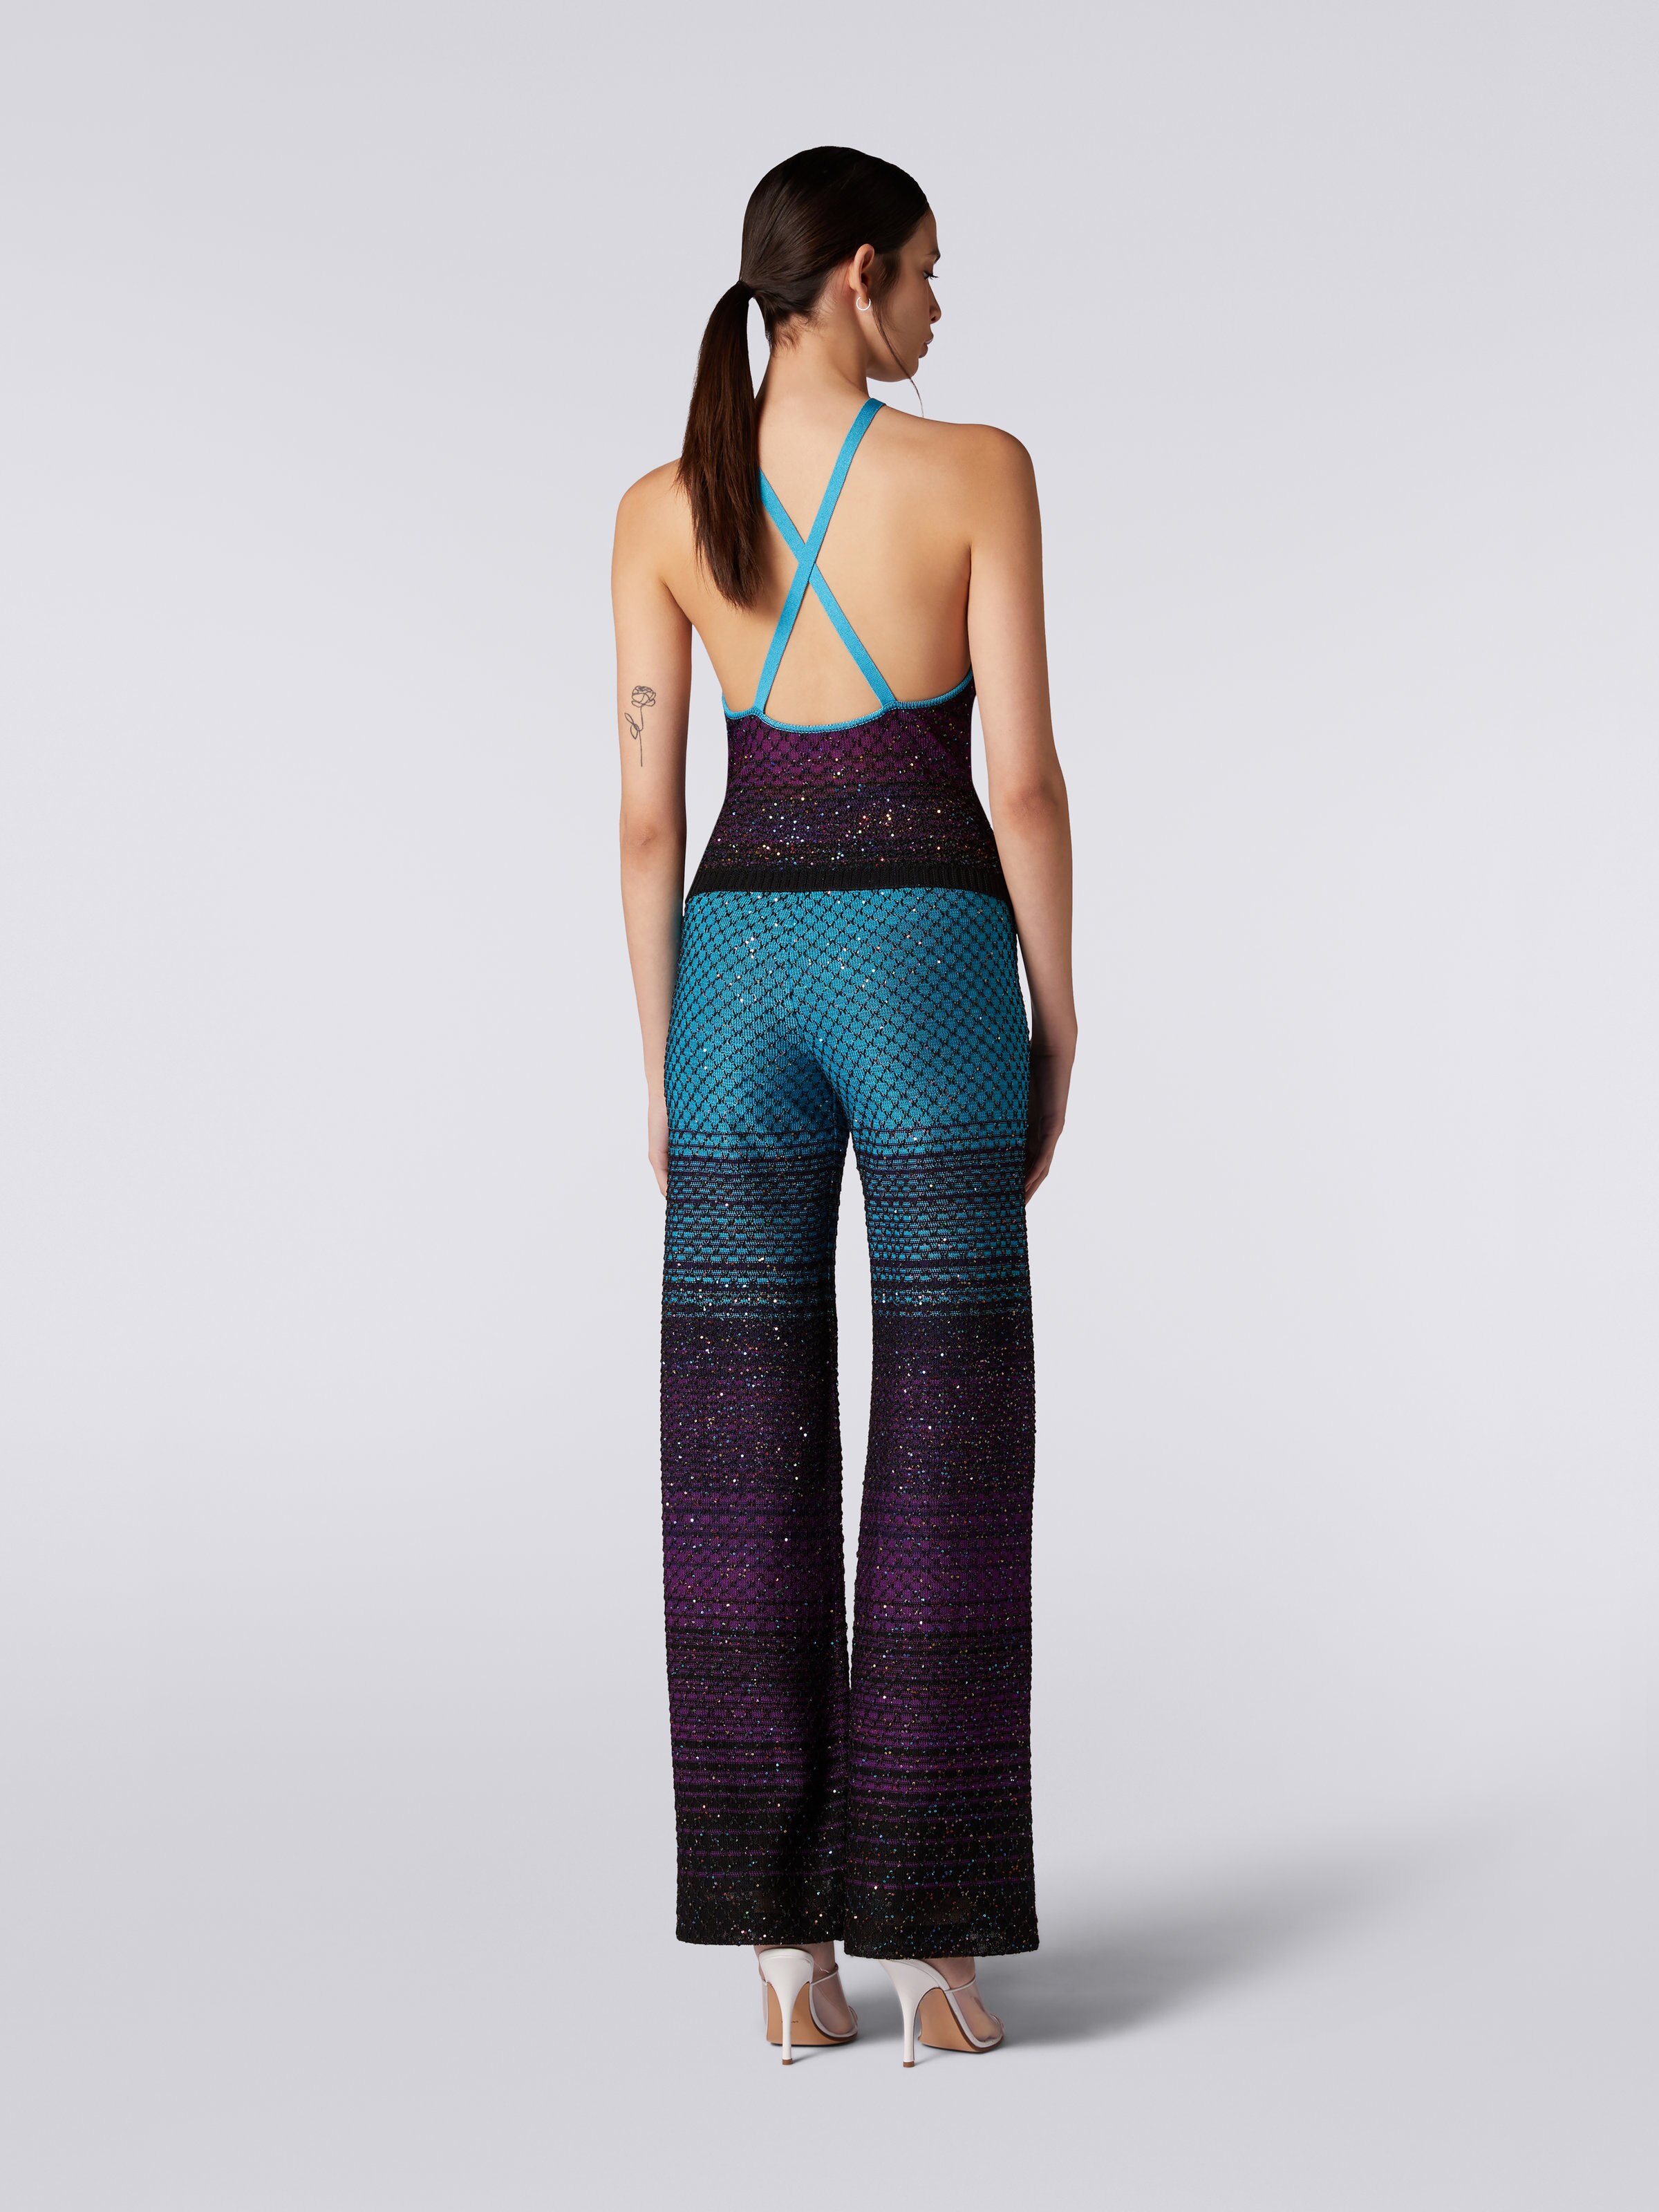 Flared knit trousers with sequins, Turquoise, Purple & Black - 3